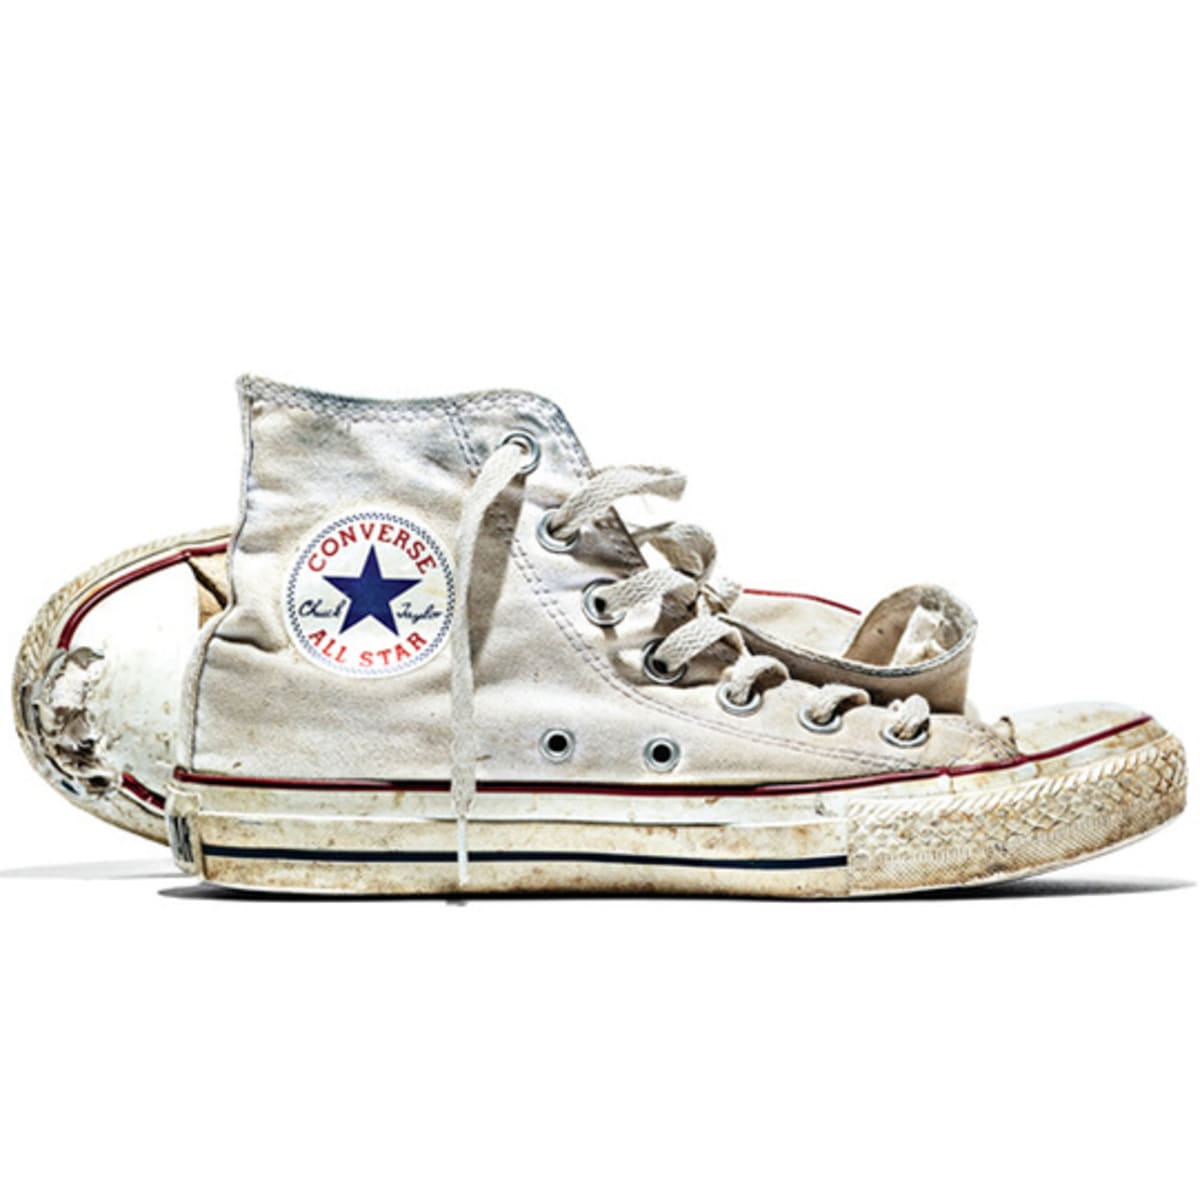 Converse Chuck Taylor All Star: The first signature sneaker